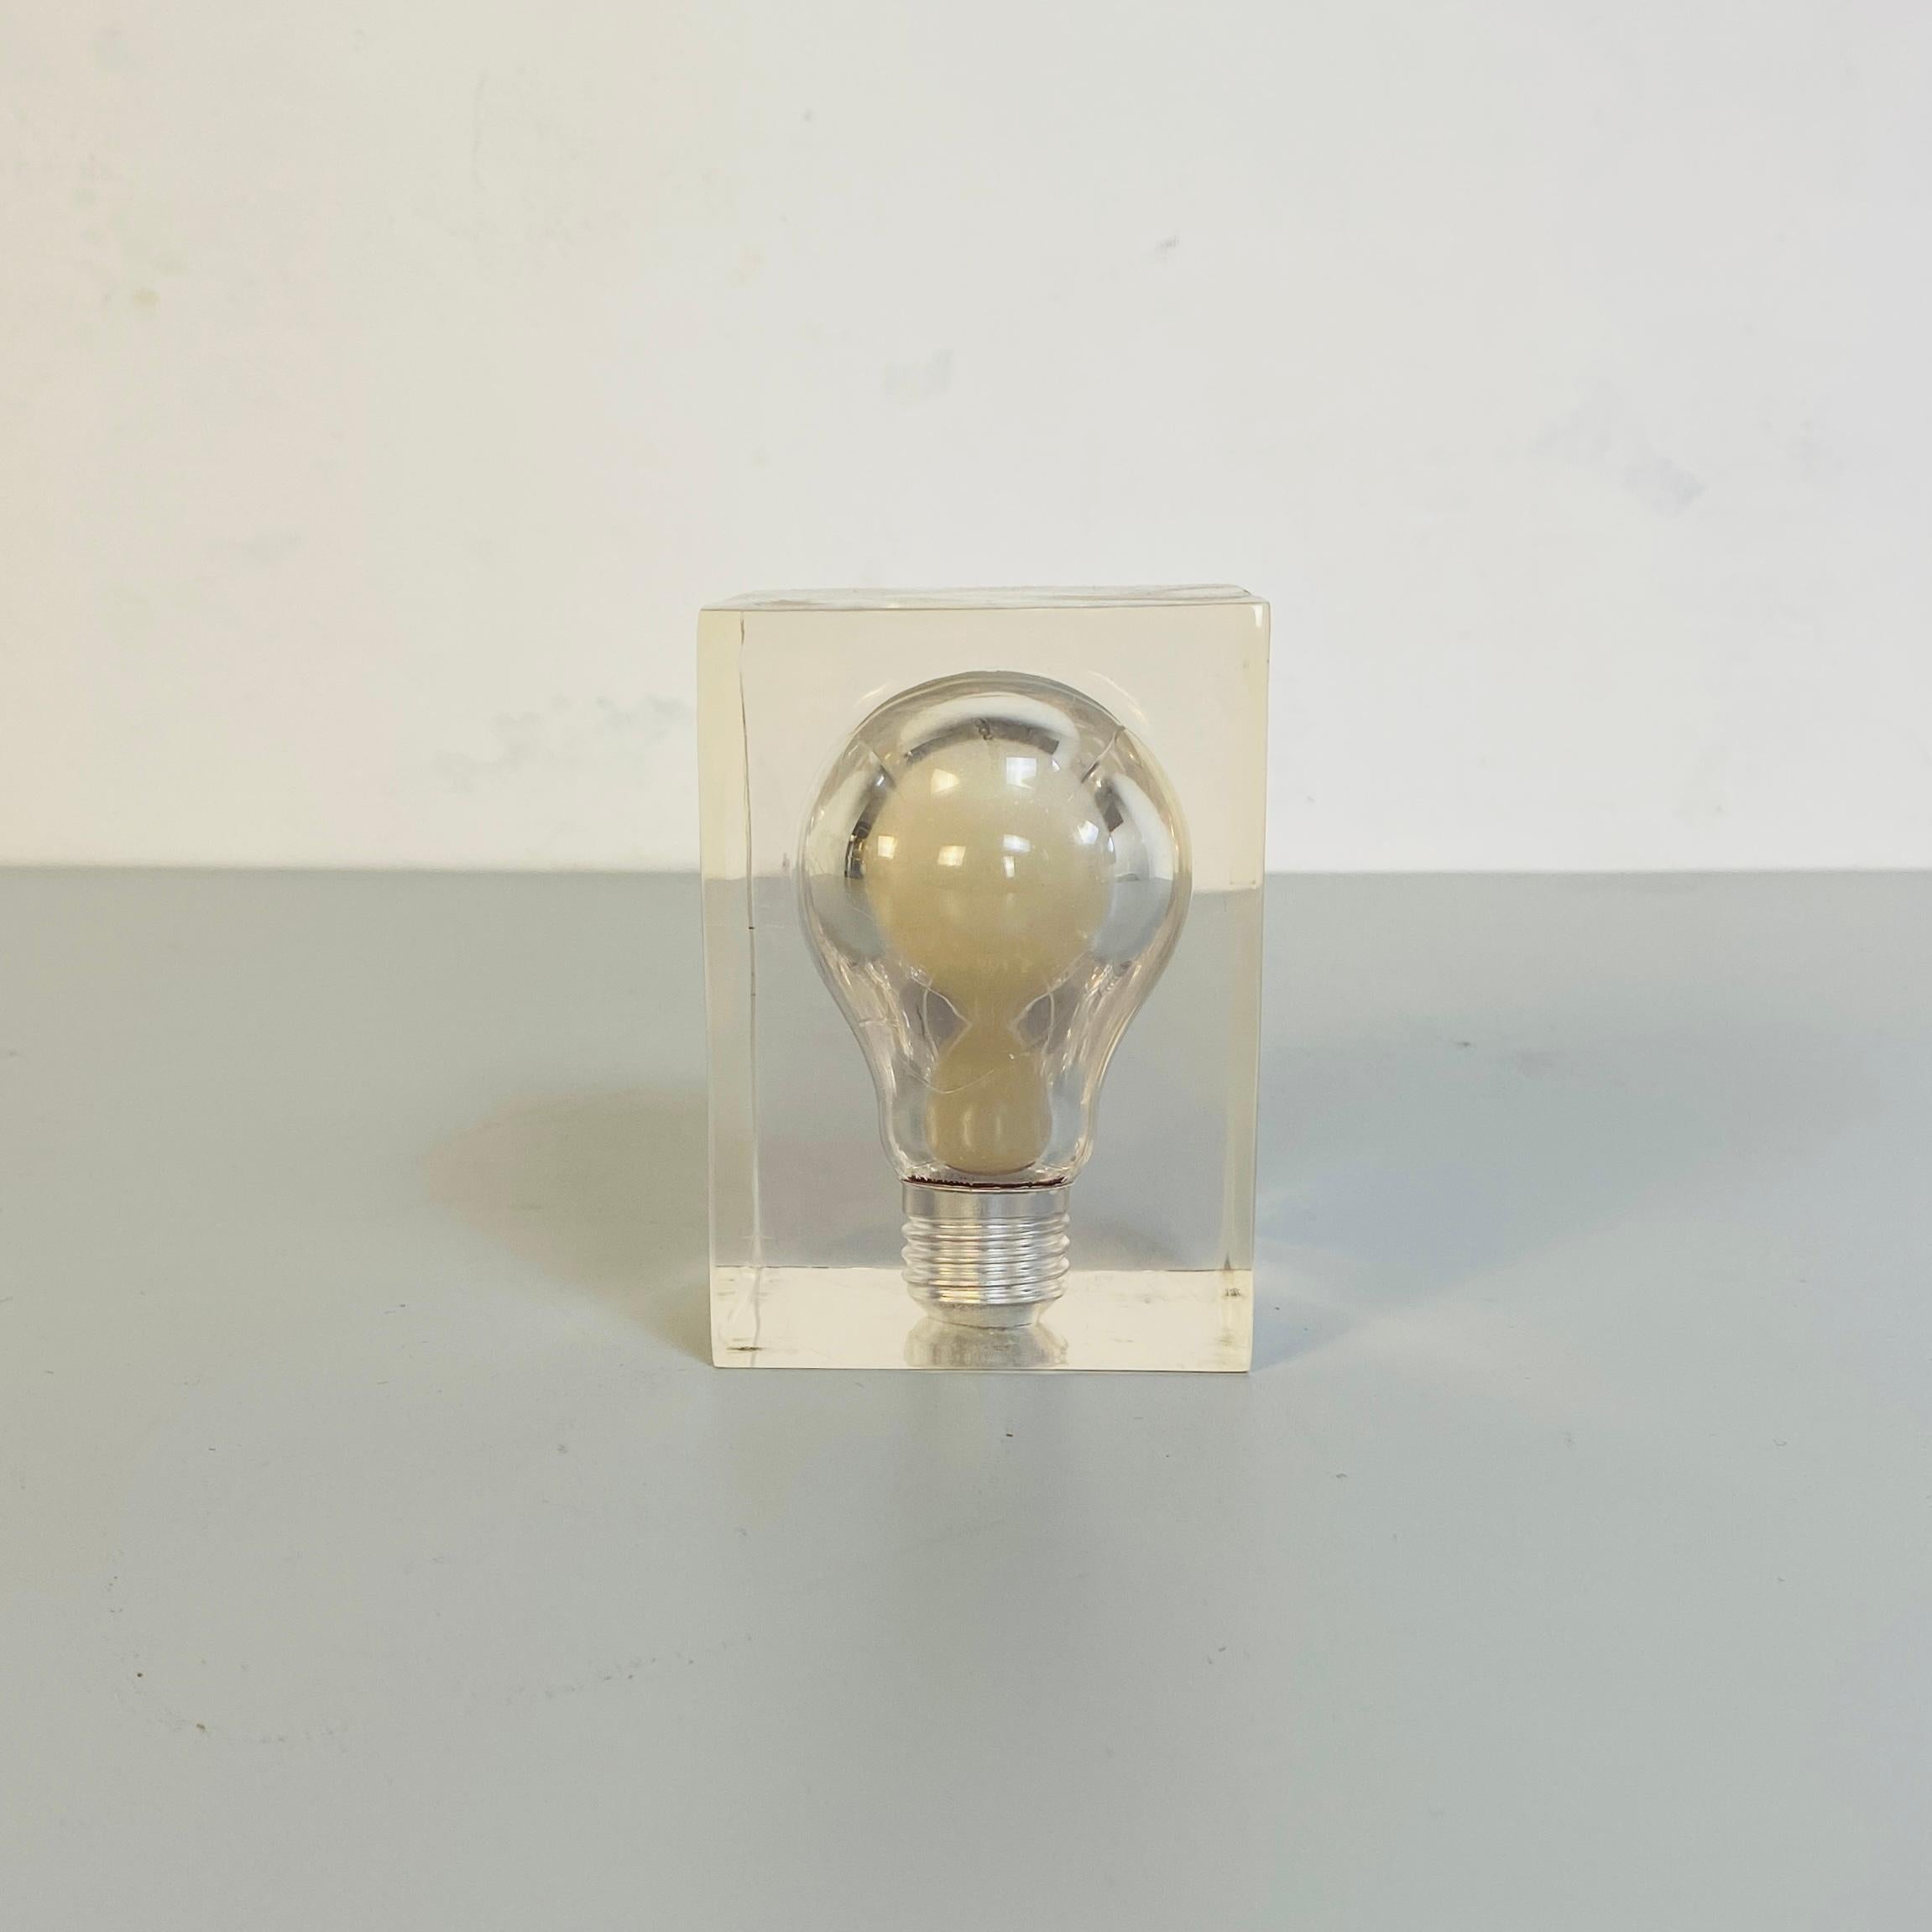 Lucite sculpture by Pierre Giraudon, 1970s
Lucite sculpture of a light bulb that glows green in the dark.
The phosphorescent bulb is enclosed in resin. Dating from the French pop art movement created by Pierre Giraudon.

1970s

Good